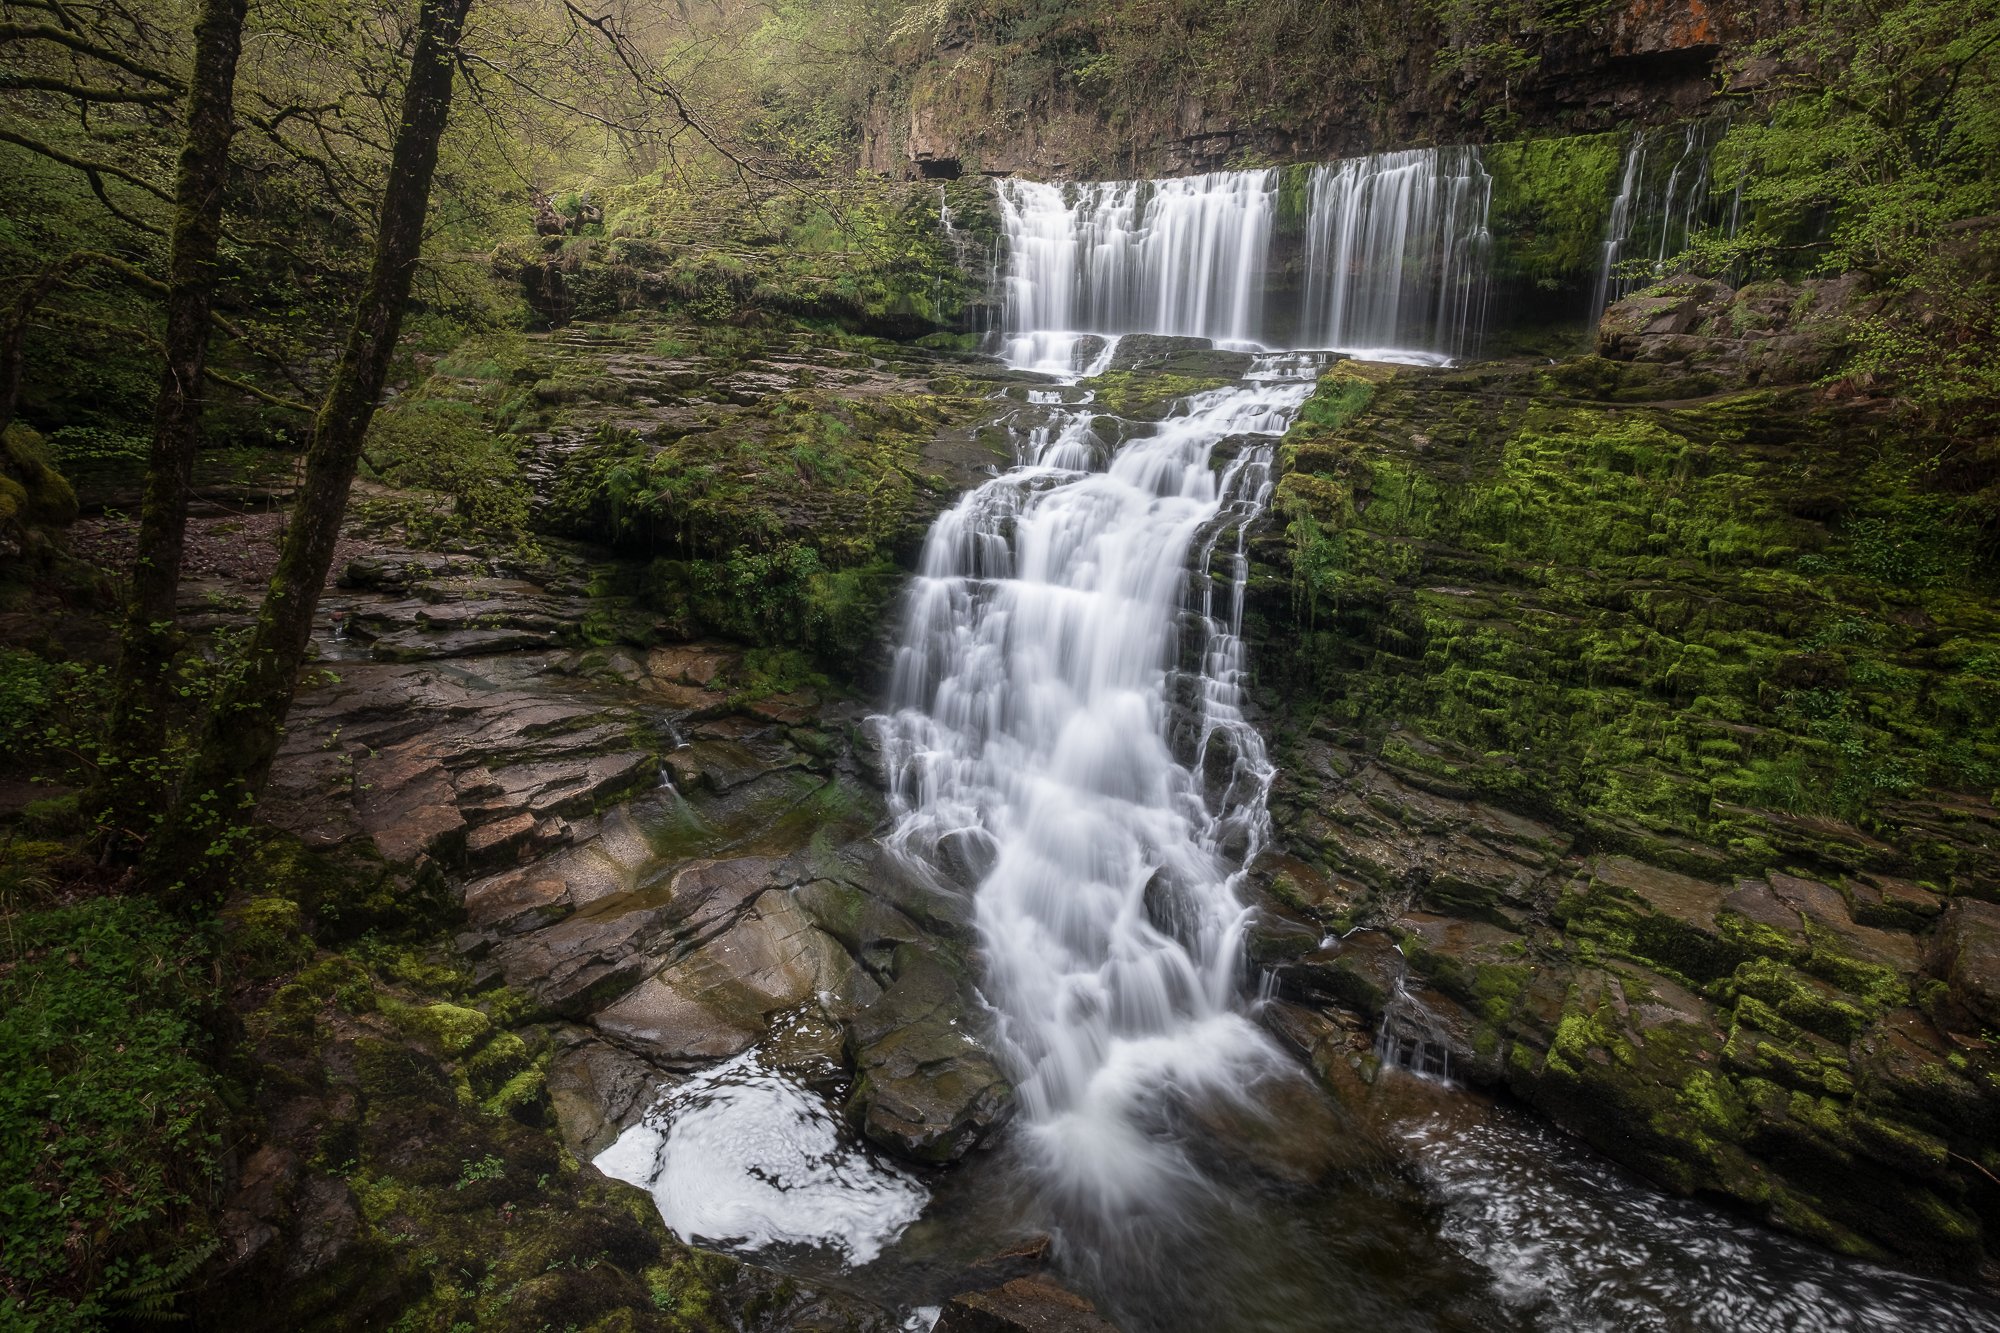 A waterfall photo taken in the Brecon Beacons by Trevor Sherwin